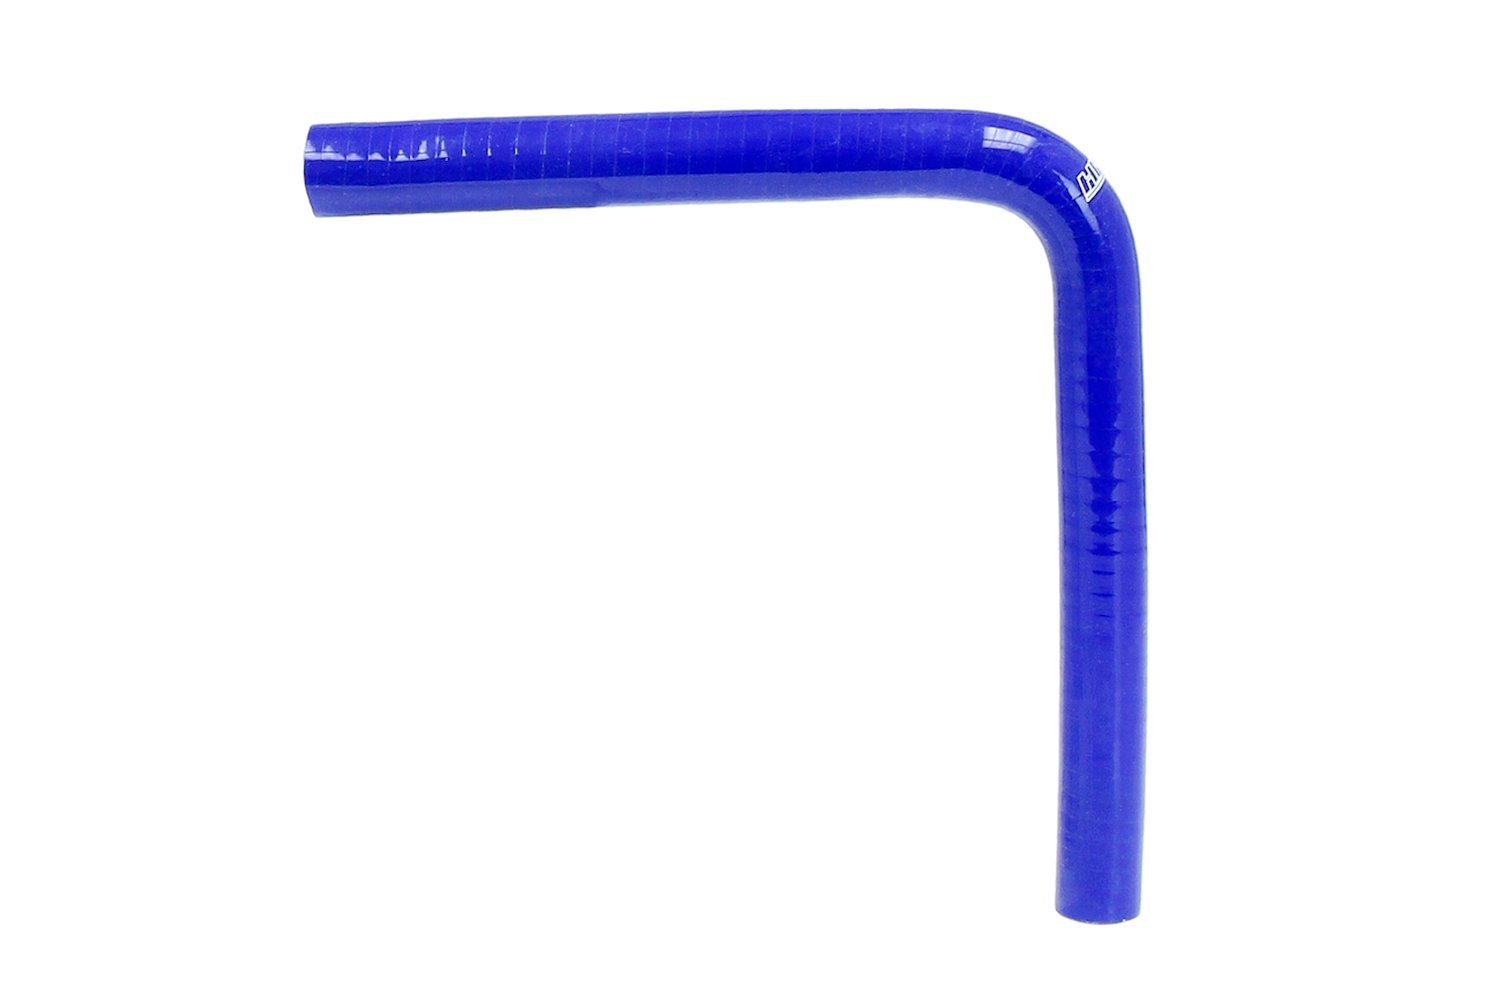 HTSEC90-032-L10-BLUE Silicone 90-Degree Elbow Hose, High-Temp 4-Ply Reinforced, 5/16 in. ID, 10 in. Leg, Blue